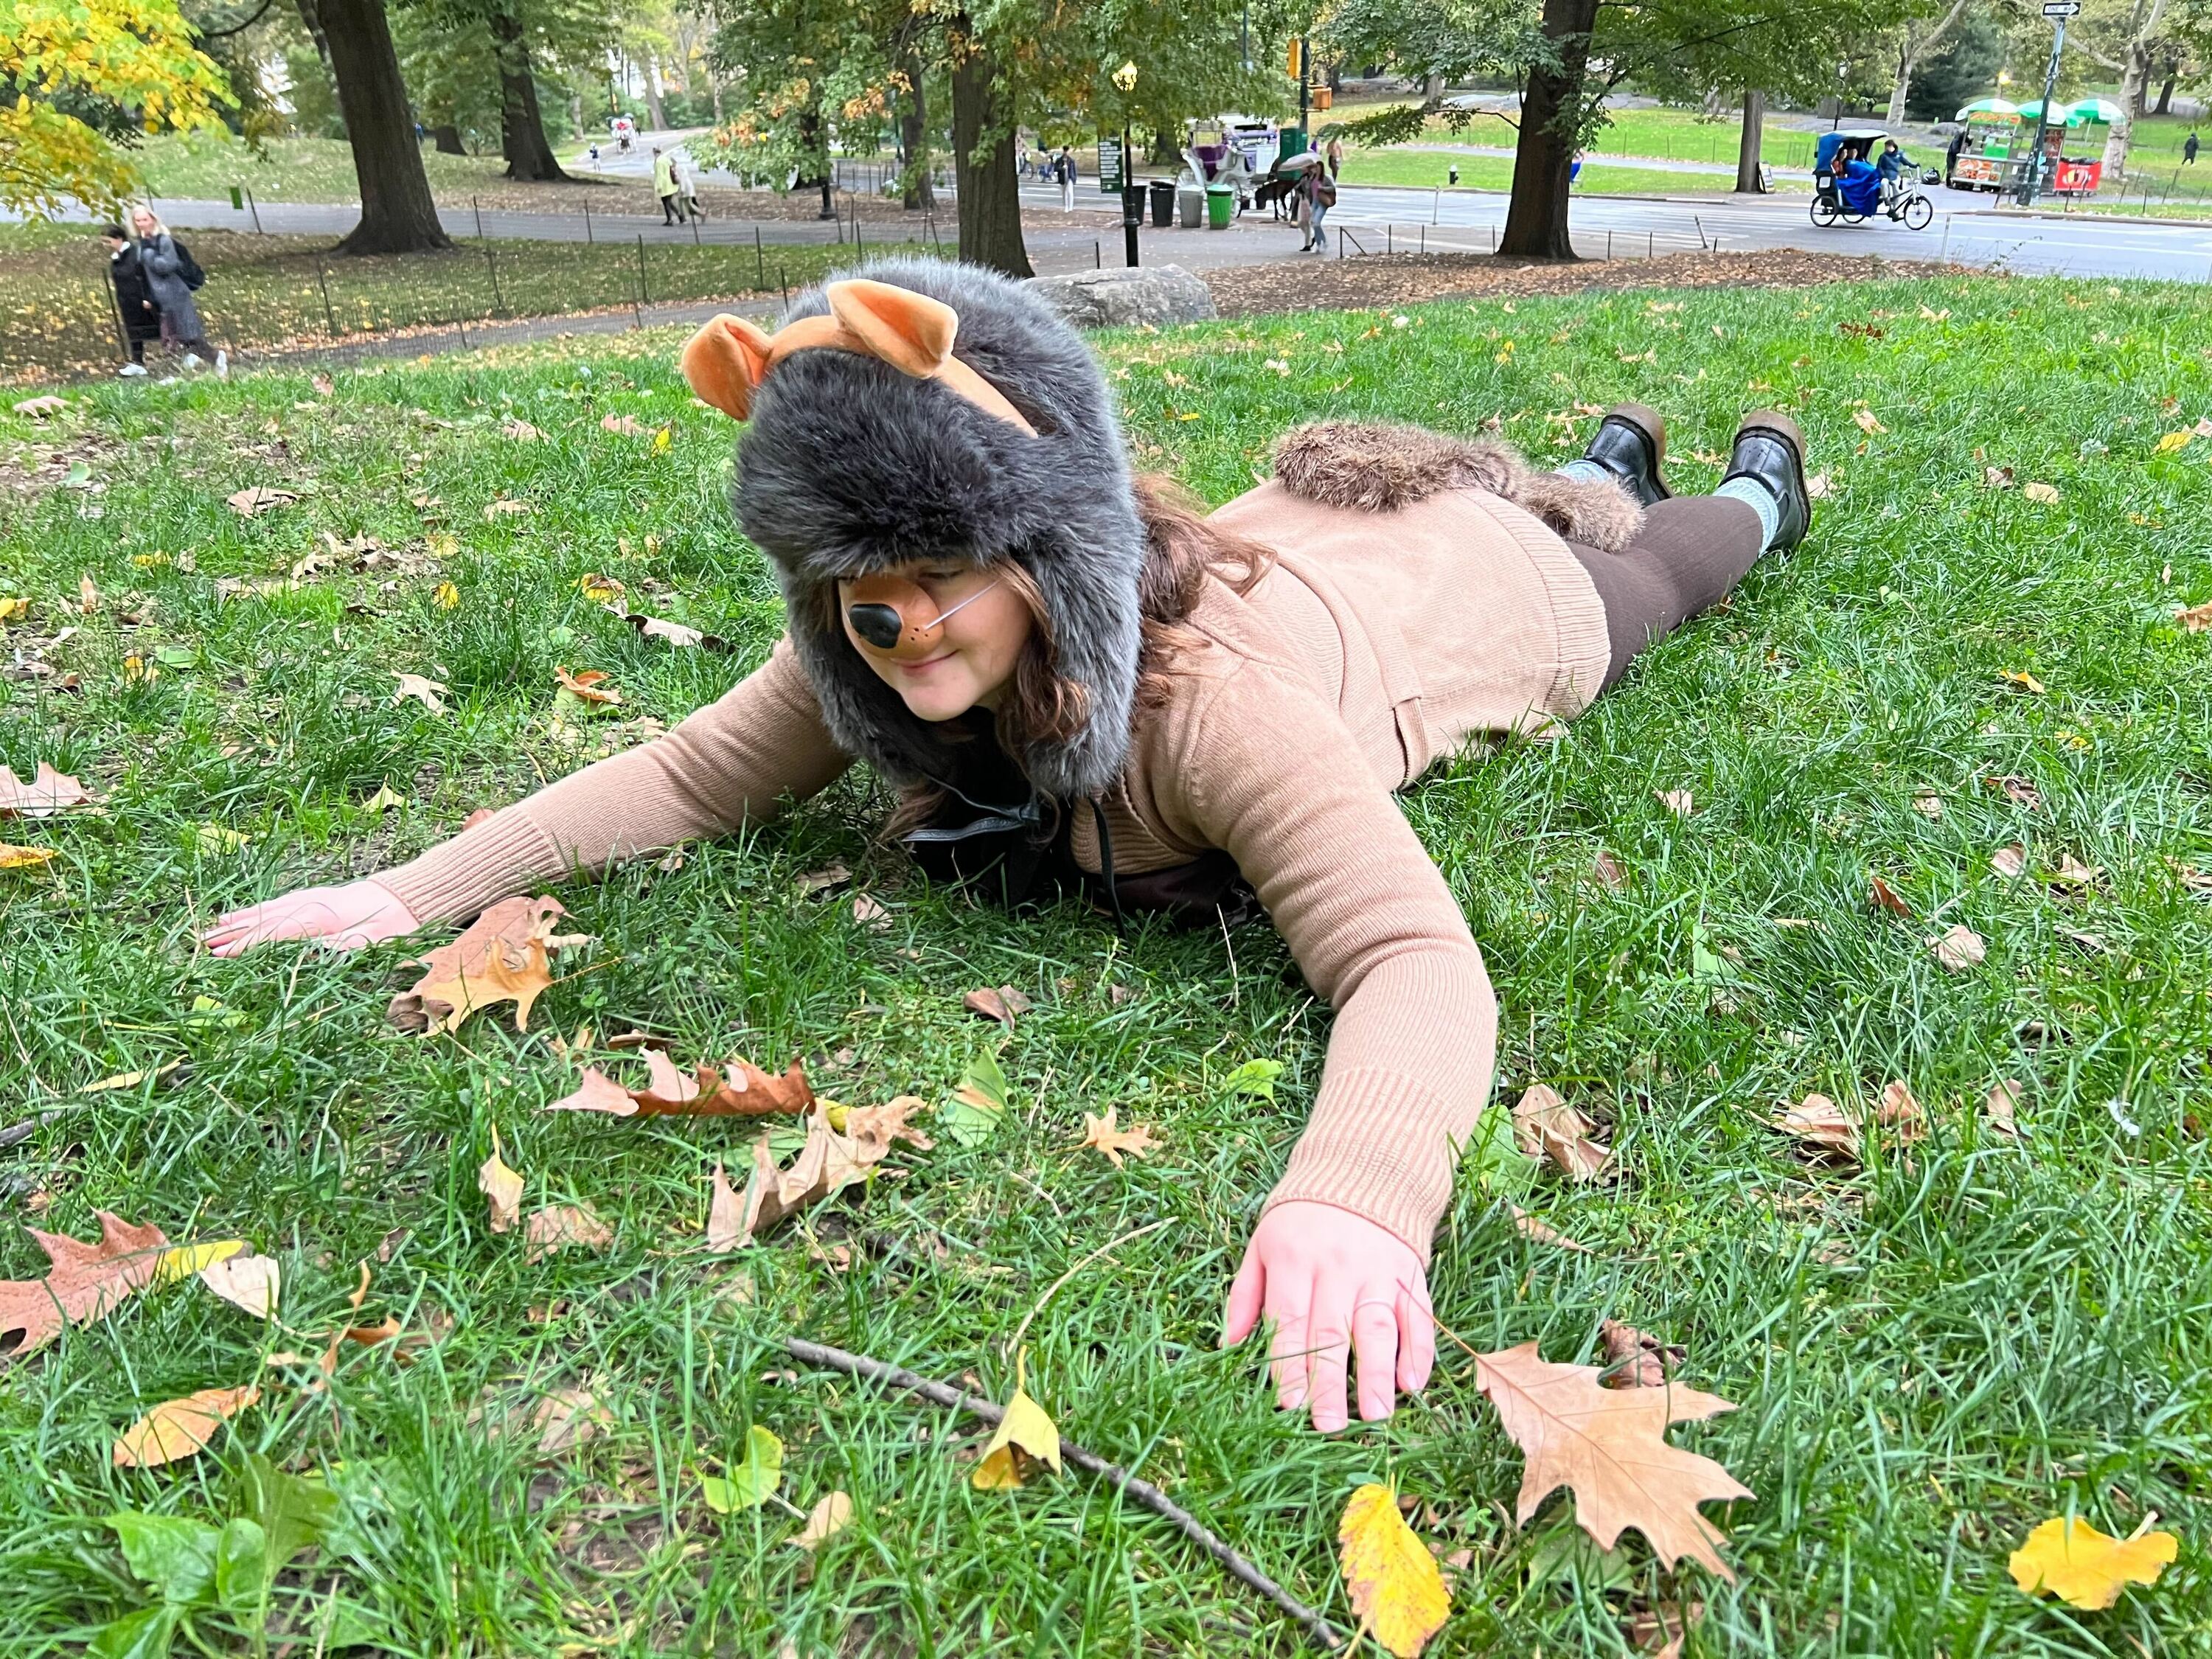 A woman dressed up as a squirrel poses in Central Park.